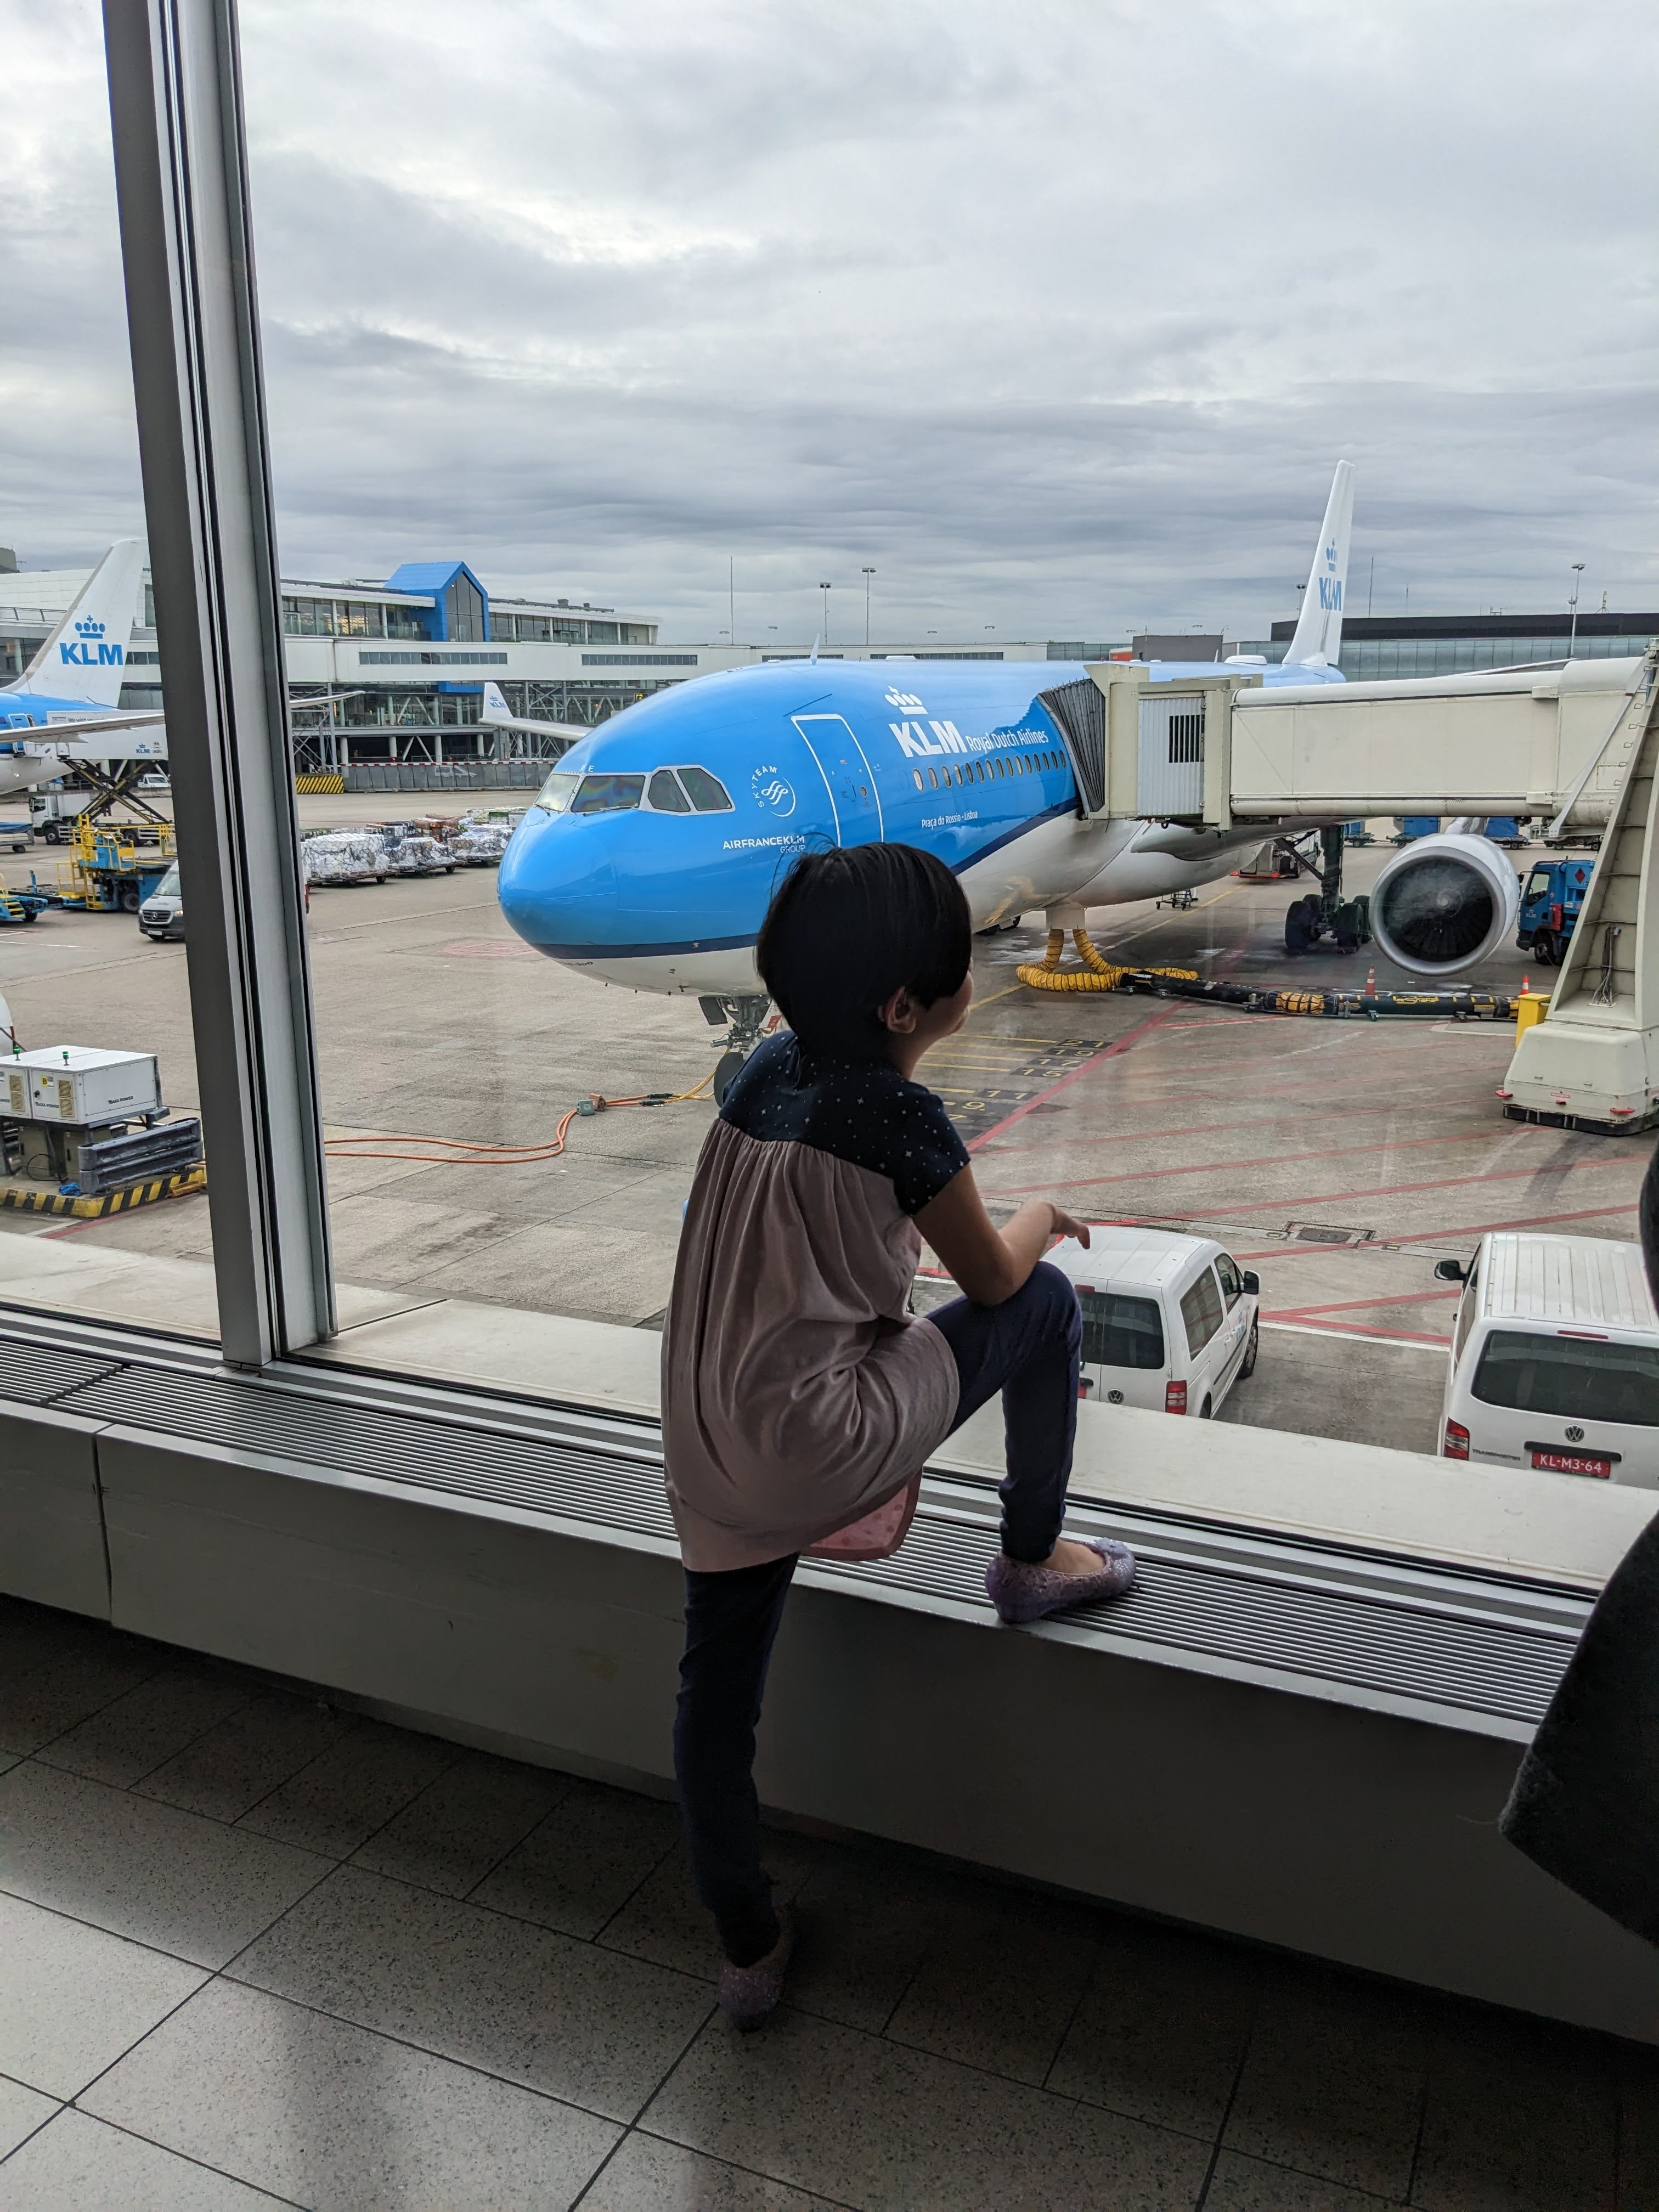 dark haired child looking out the window at an blue KLM plane